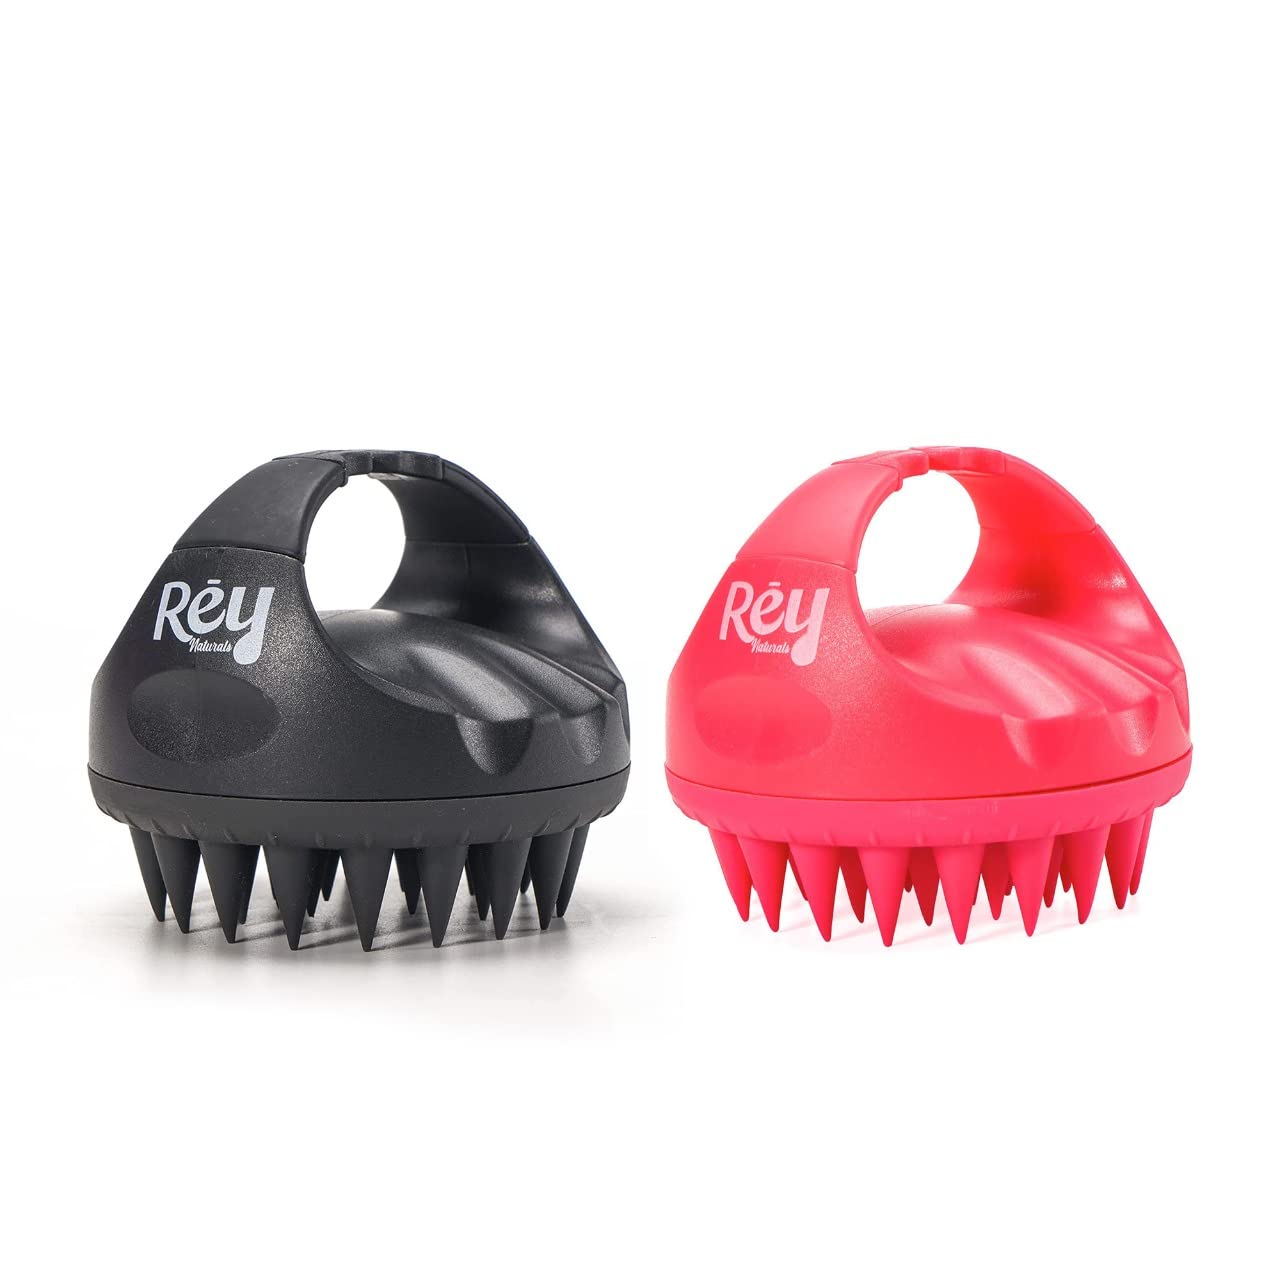 Rey Naturals Hair Scalp Massager Shampoo Brush for him & her with Long and Soft Silicon Bristles | Manual Massager | Scalp Care | Exfoliating Anti Dandruff | Red & Black Colour